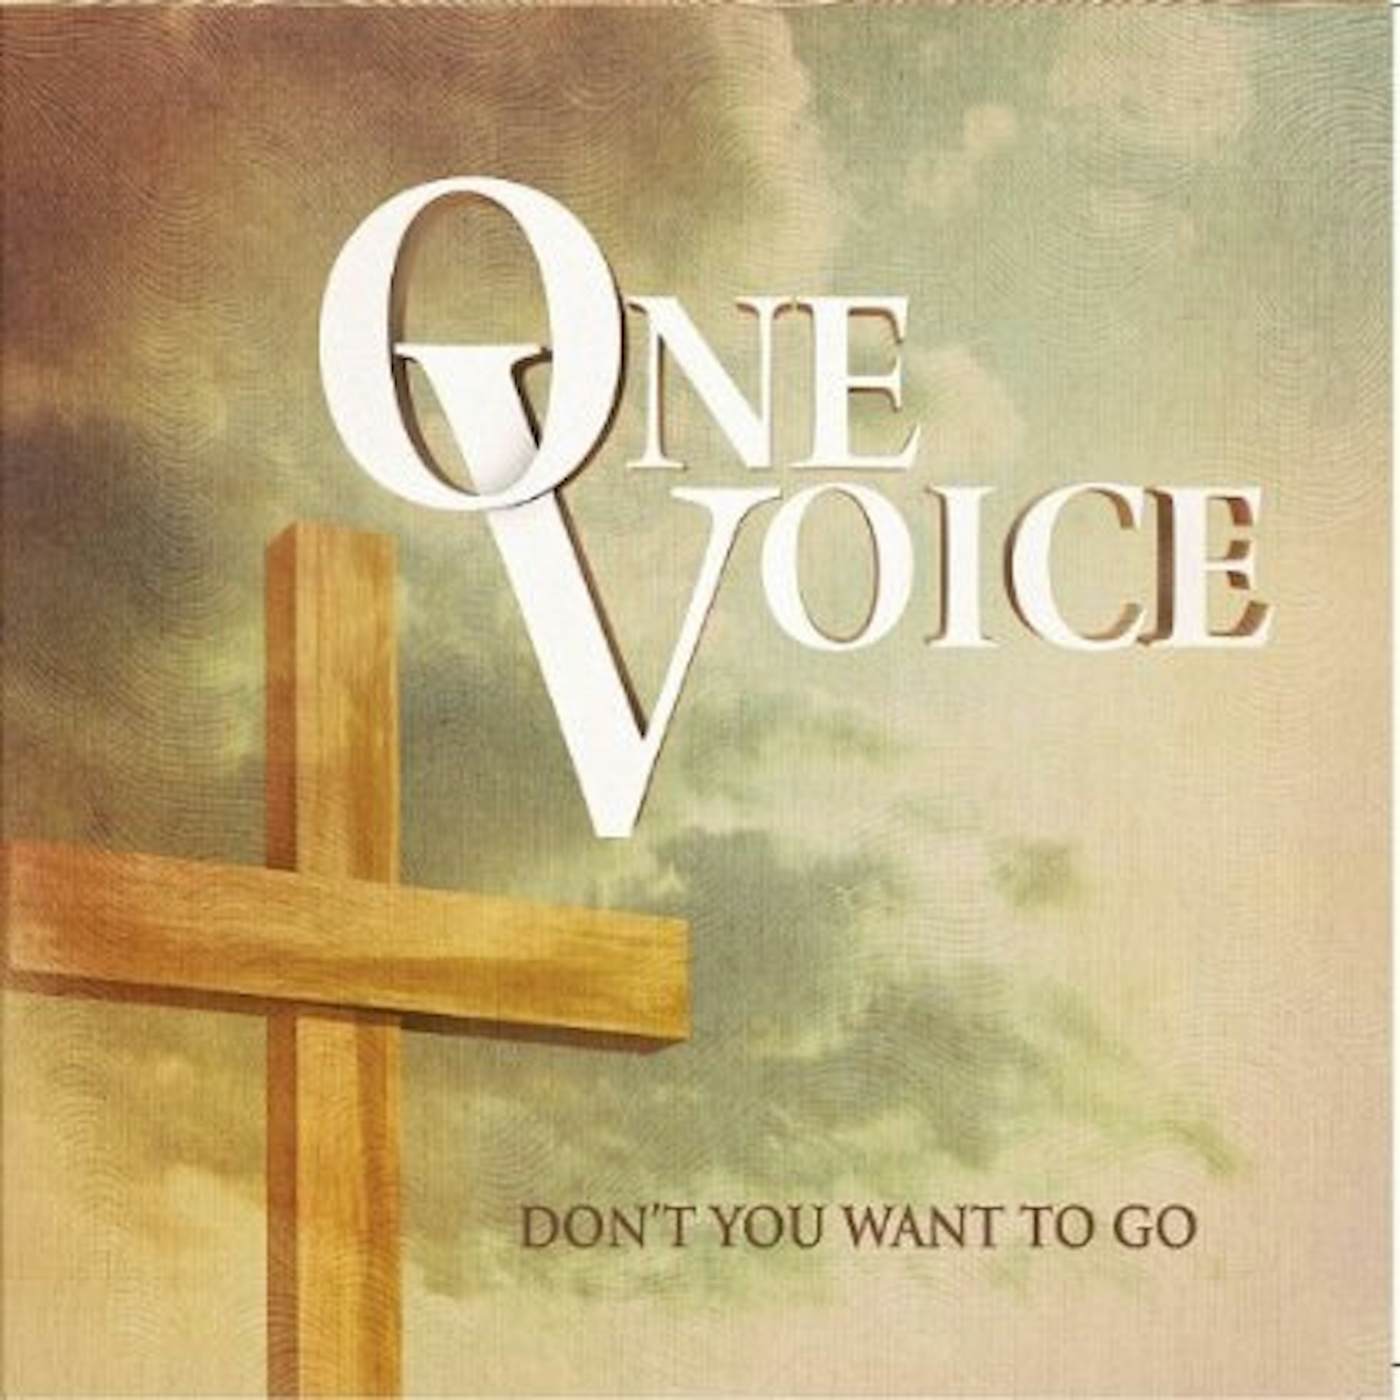 One Voice DON'T YOU WANT TO GO CD